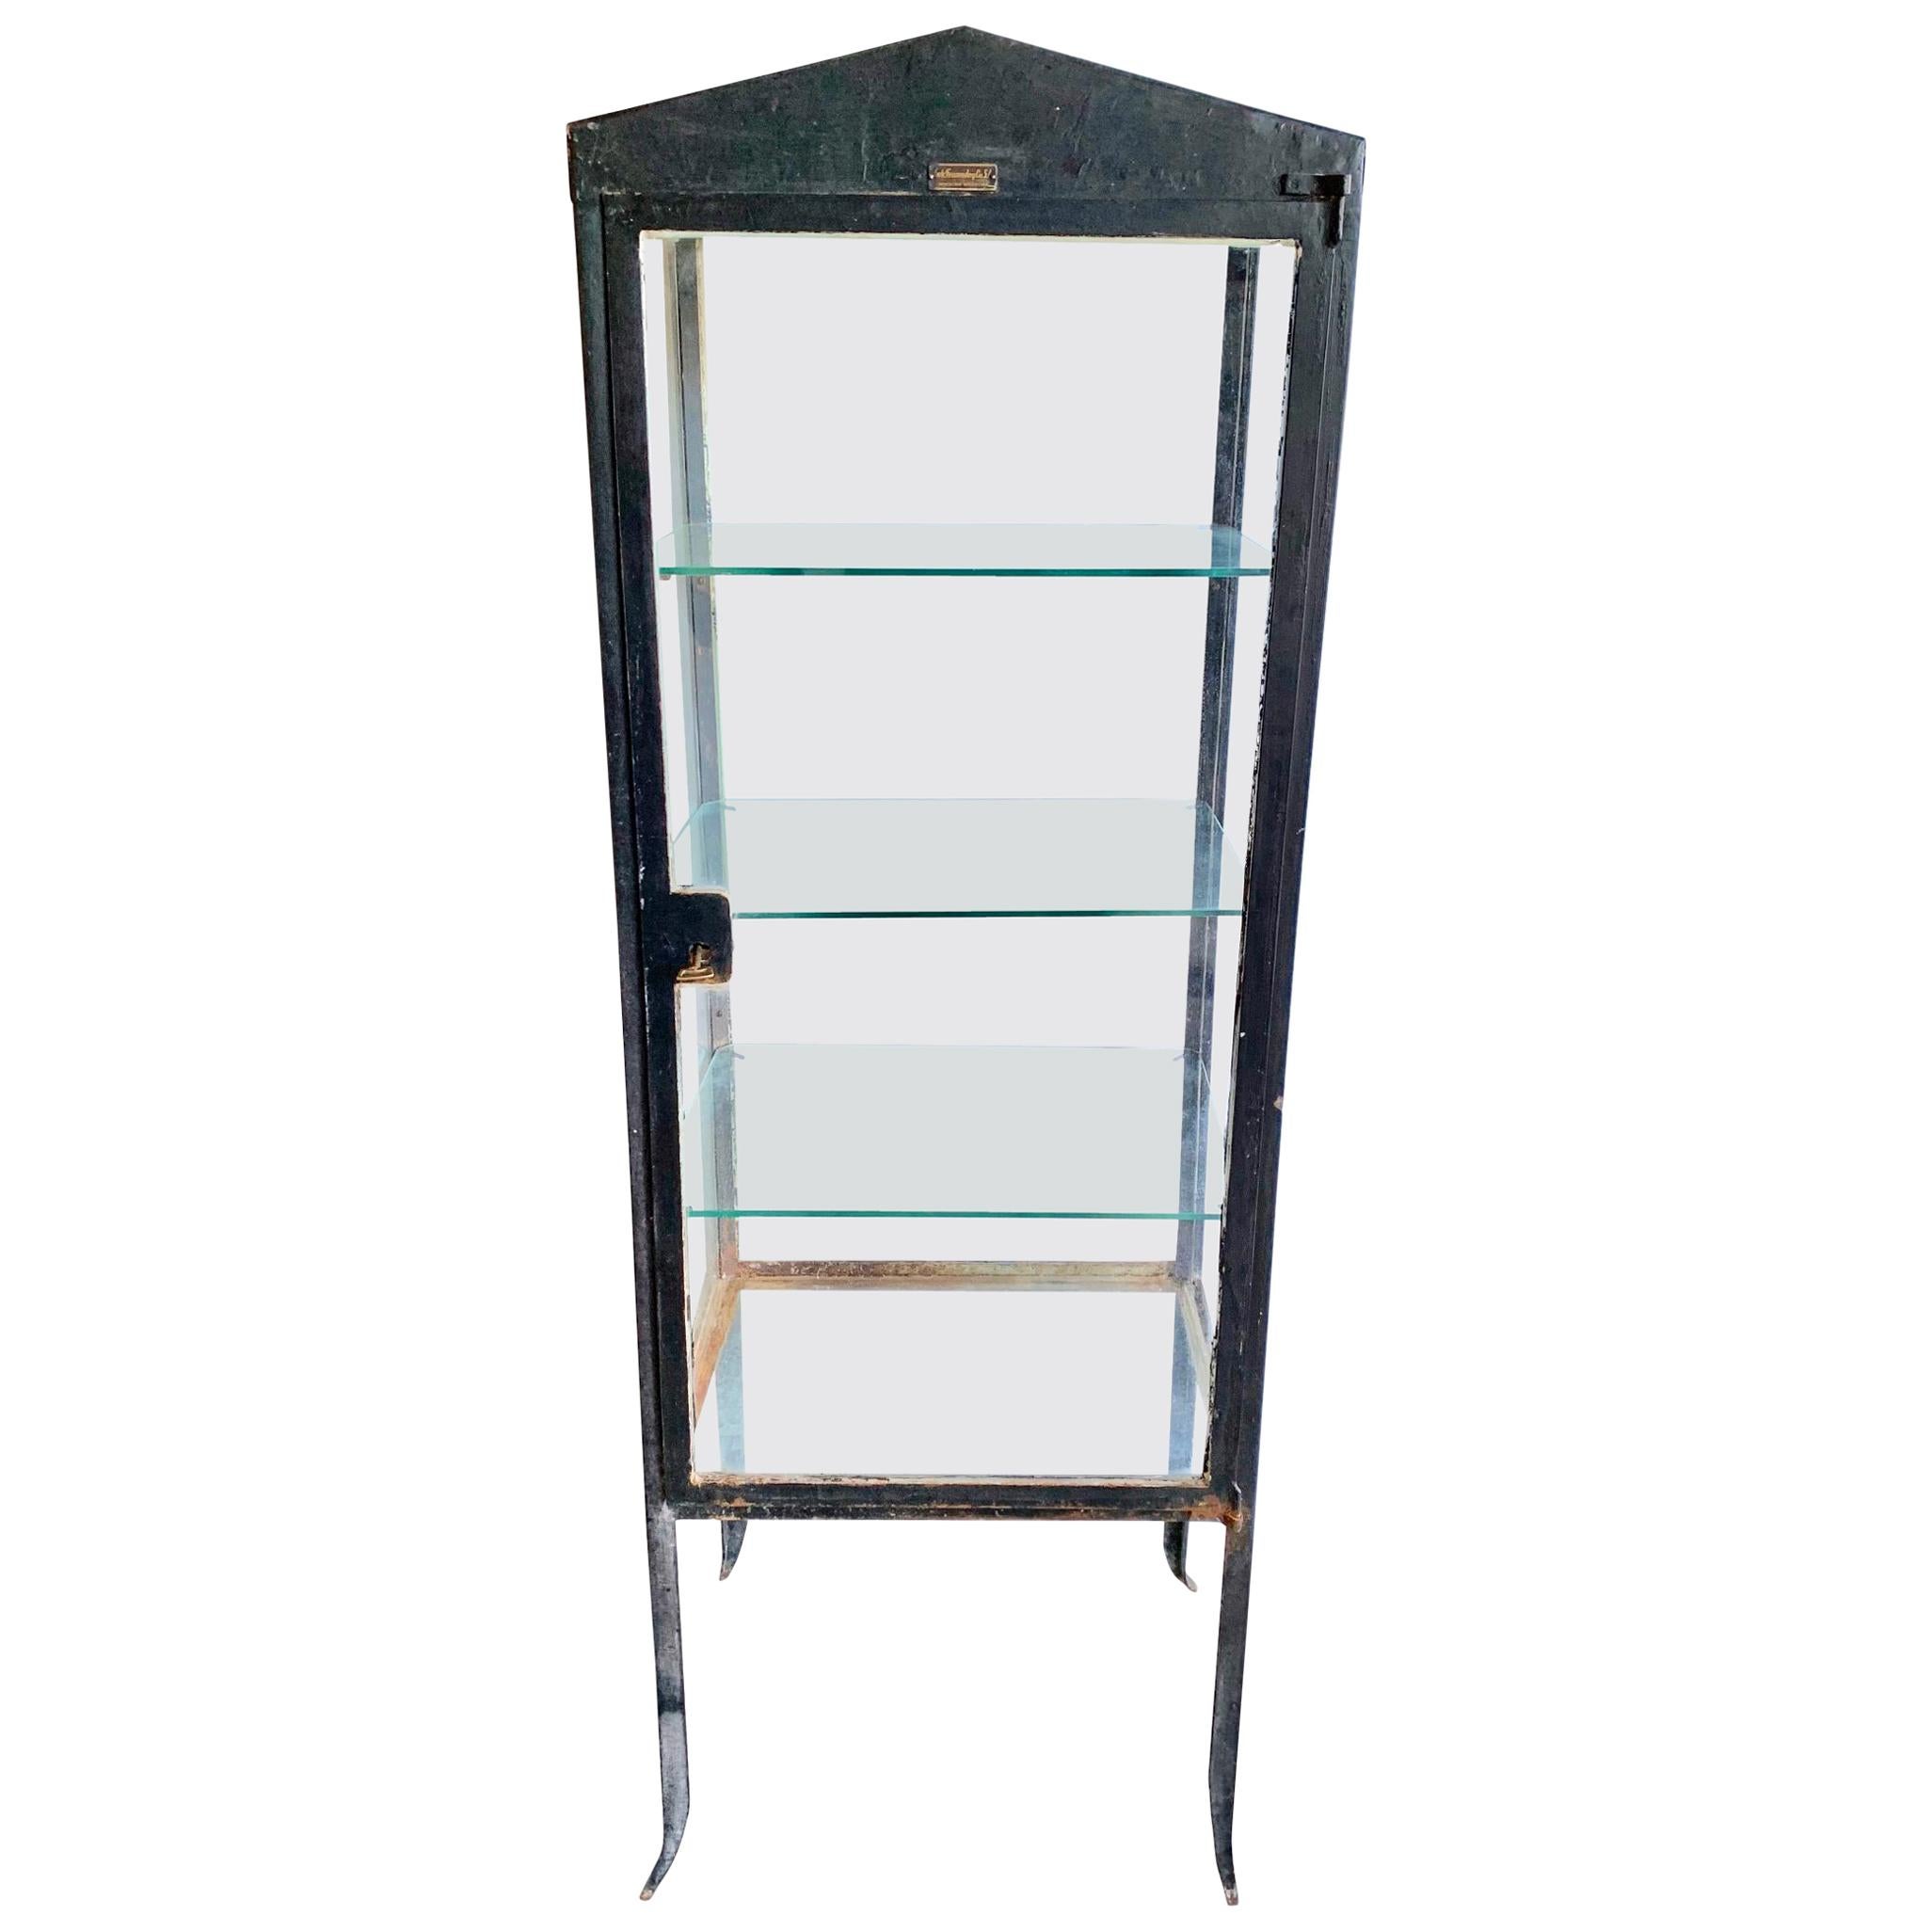 1920s Iron and Glass Art Deco Vitrine from Argentina